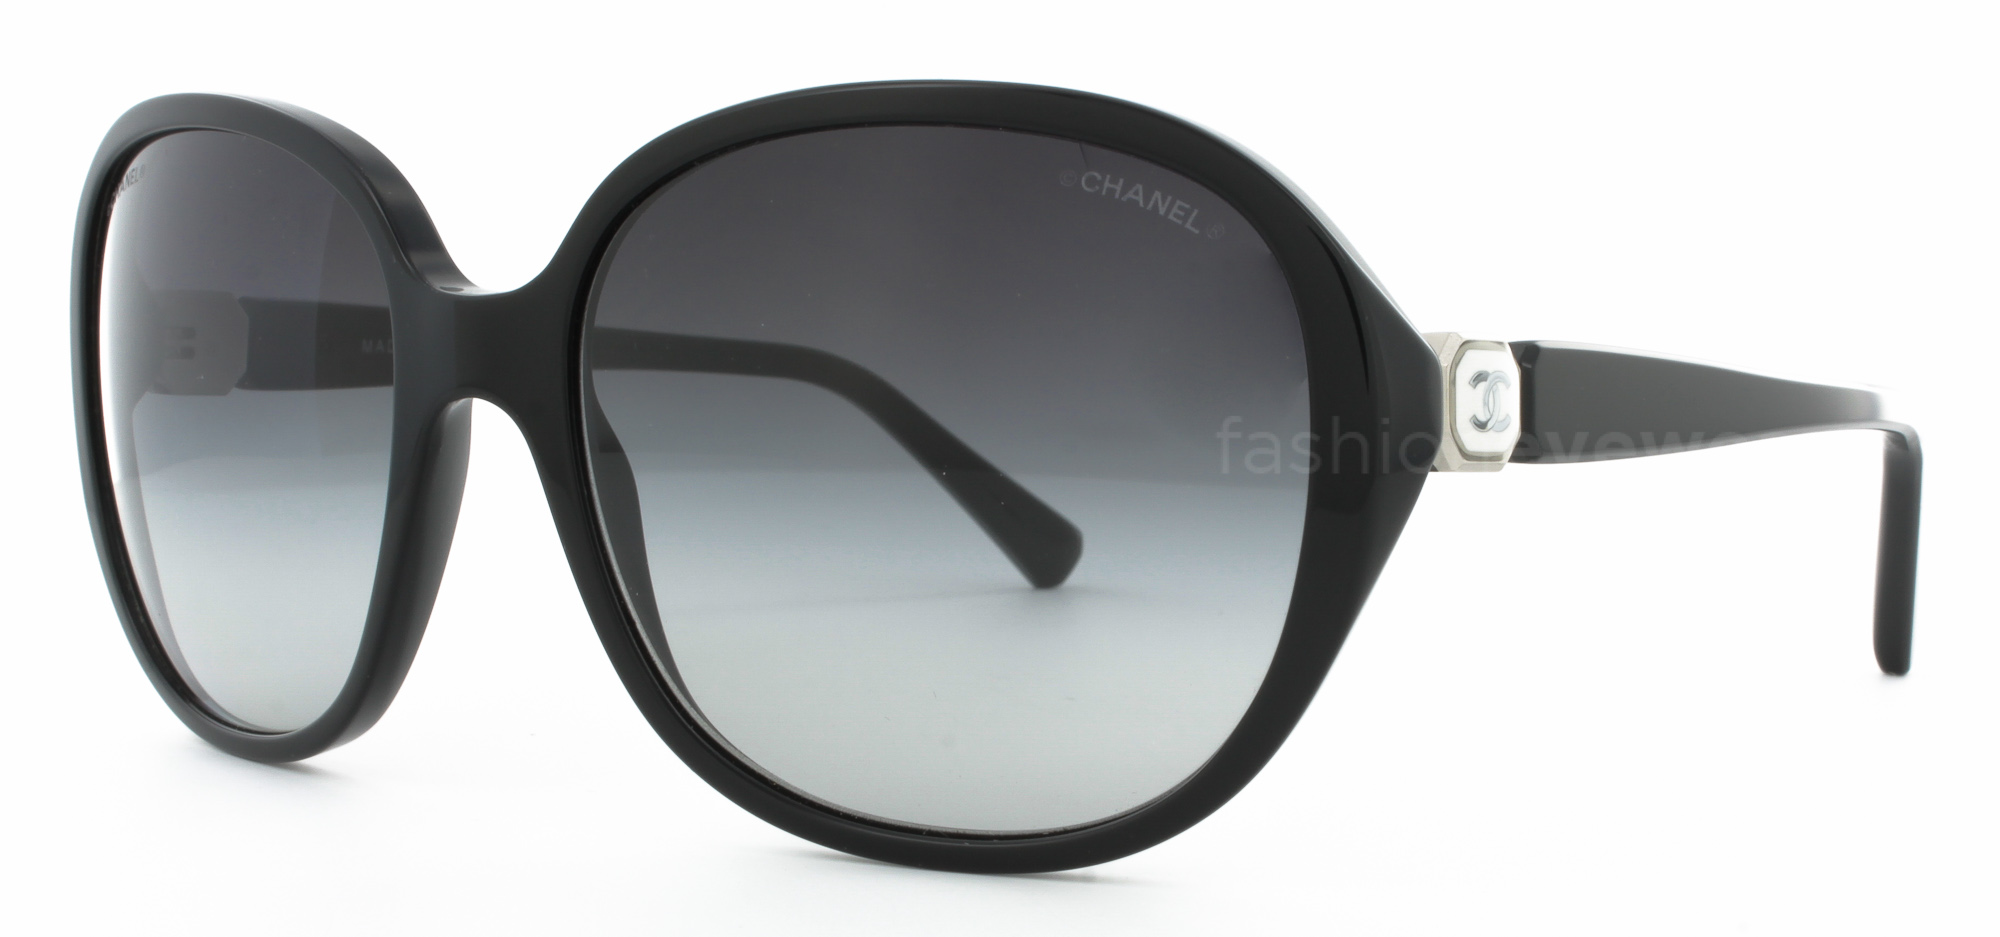 CHANEL 5285 760S6